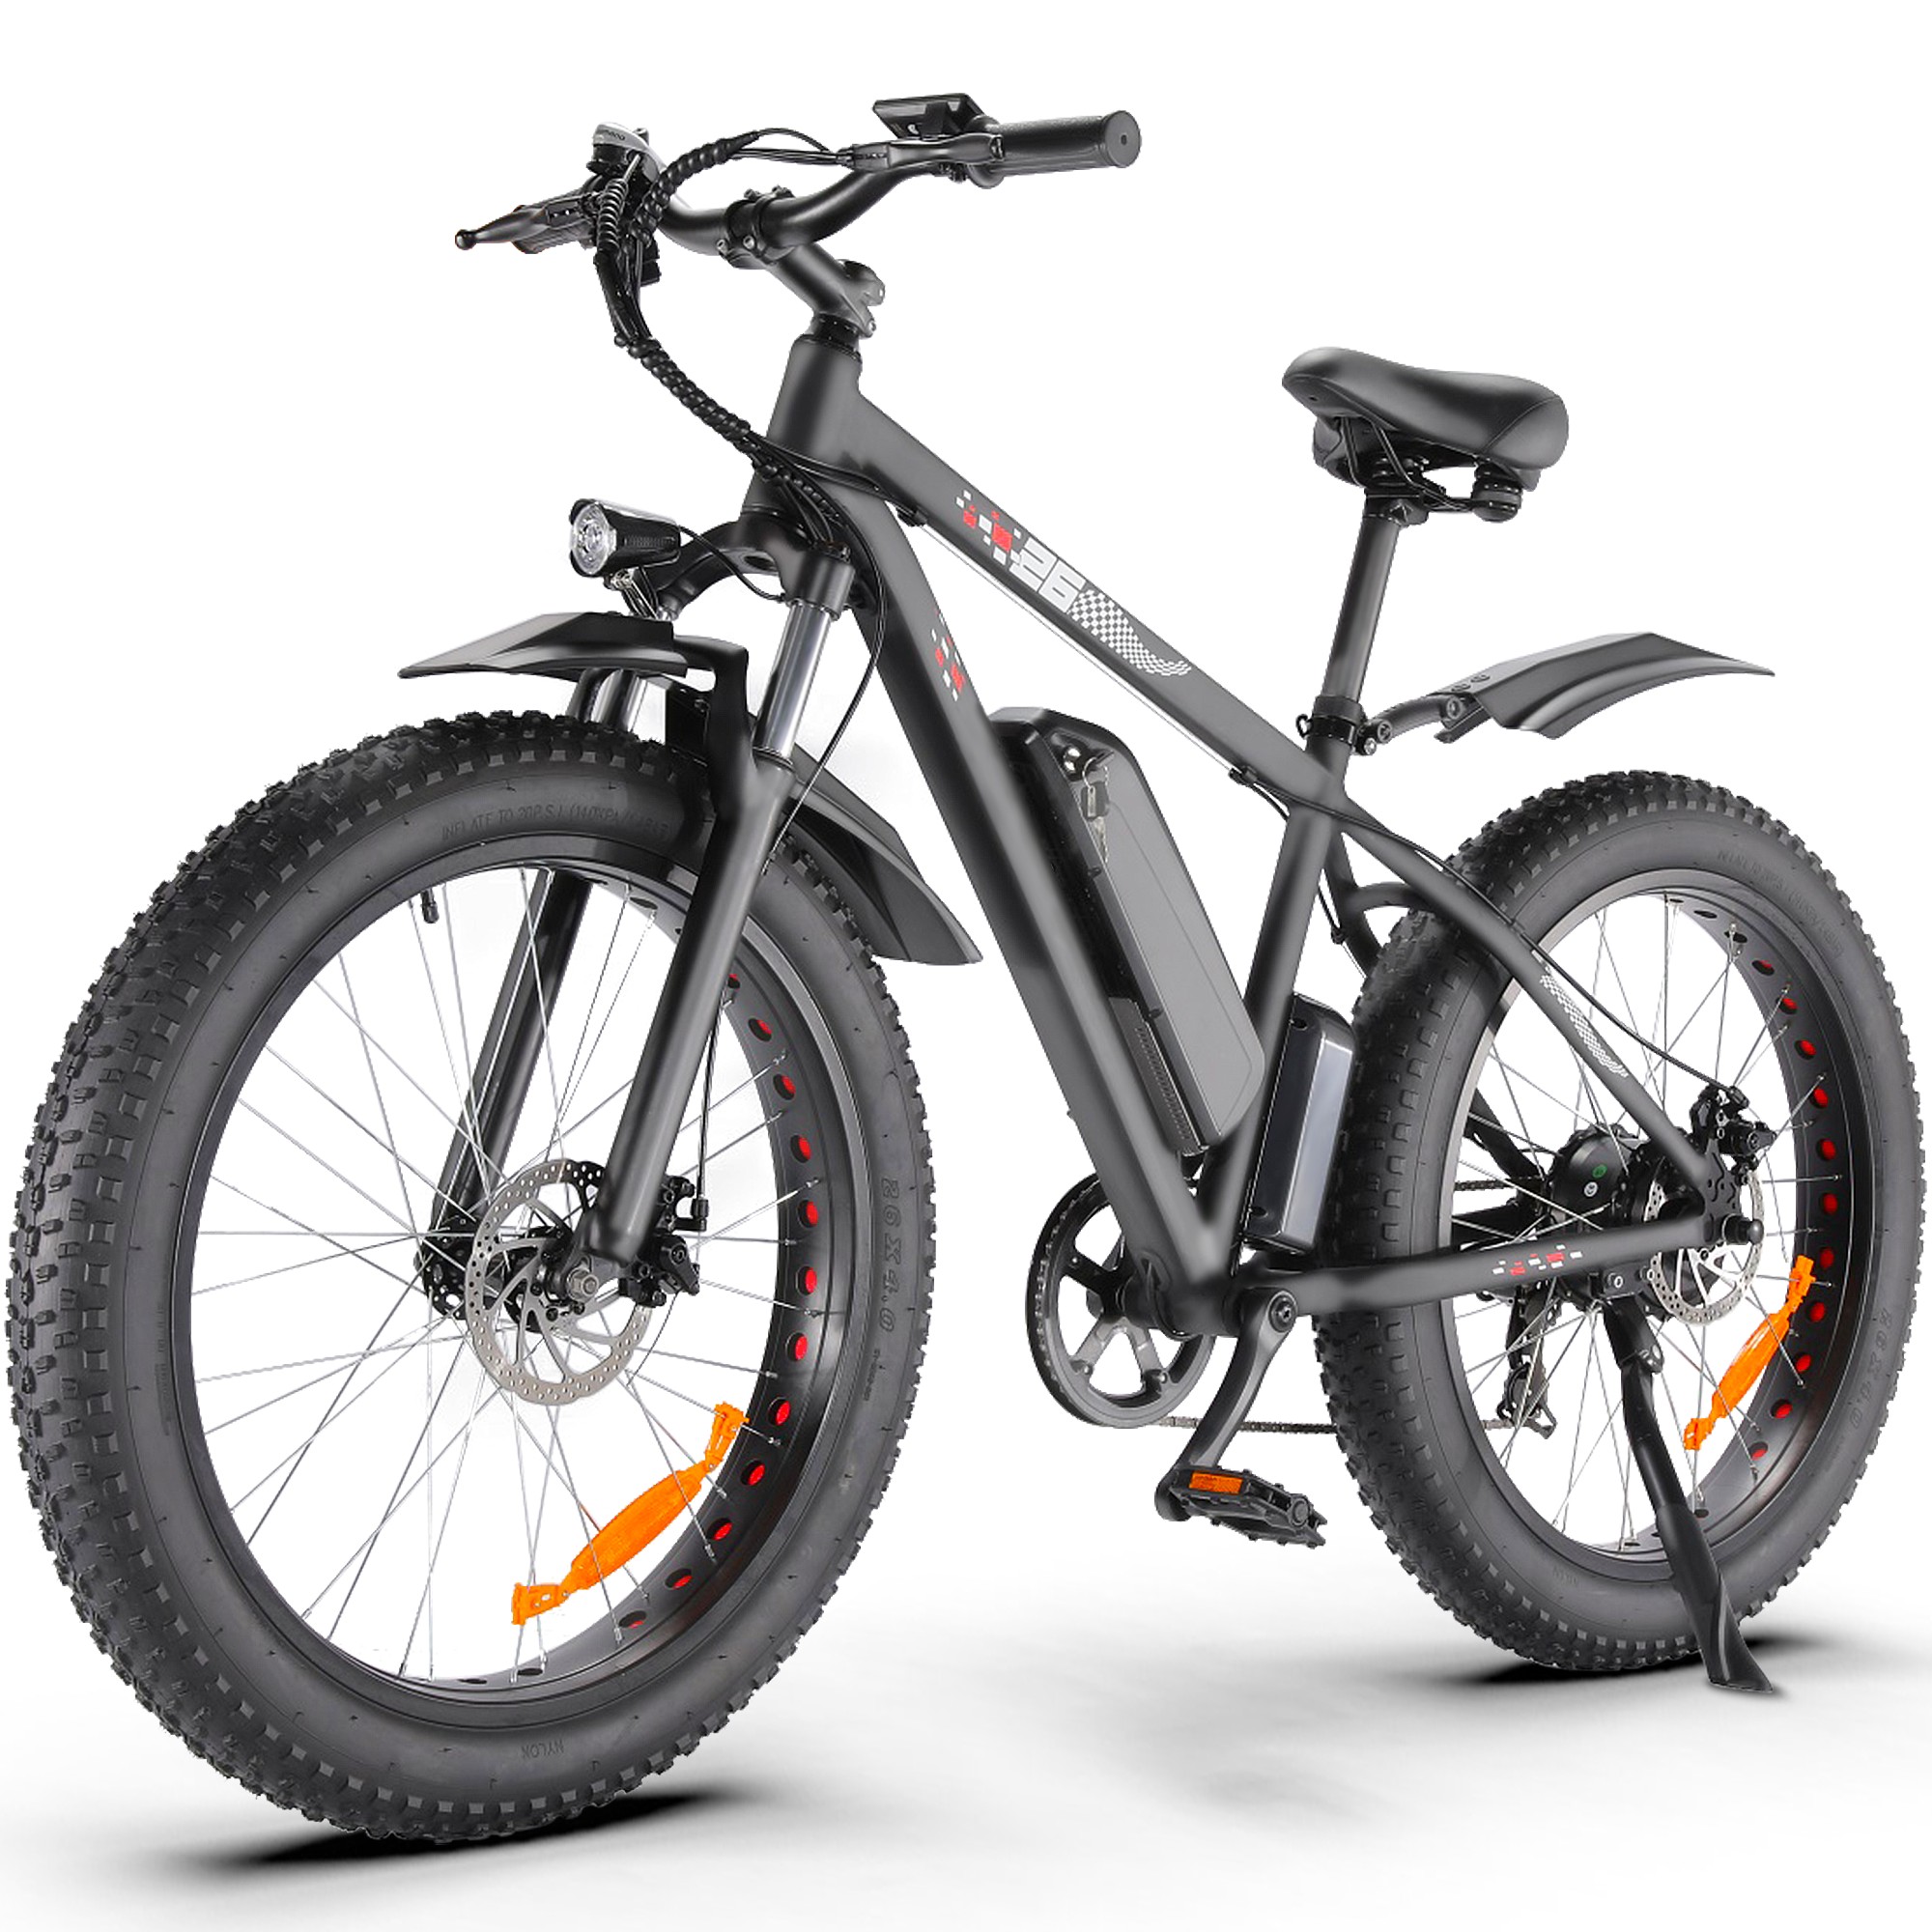 Electric Bike, 26" x 4" Fat Tire Electric Bike for Adults 500W 19.8MPH Electric Mountain Bicycle Snow Beach Ebike, 48V 10.4Ah Battery, Lockable Suspension Fork, LCD Display, Fast Charge, Red - image 1 of 16